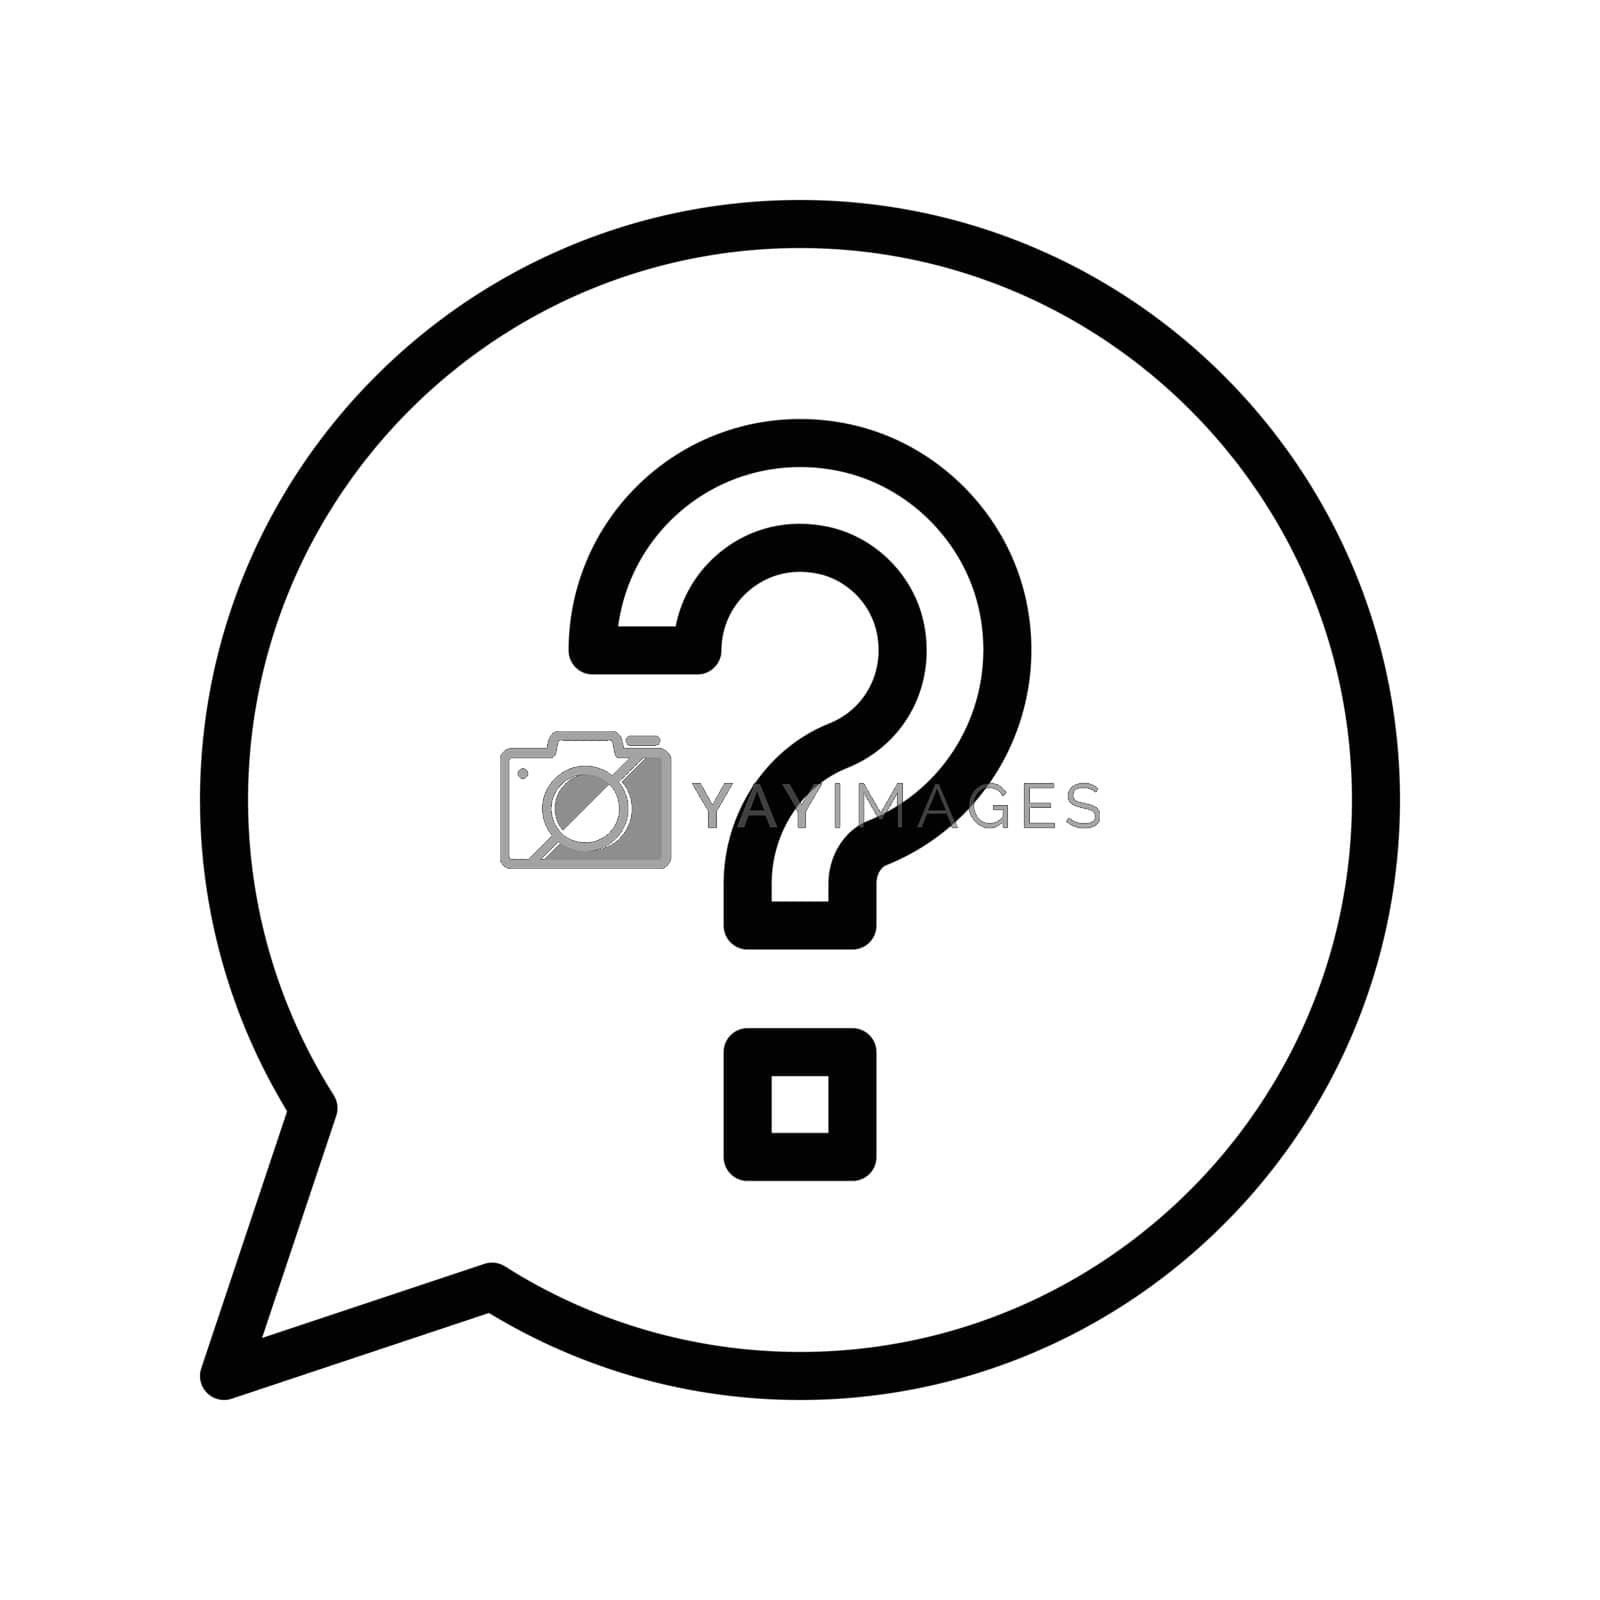 Royalty free image of question by vectorstall